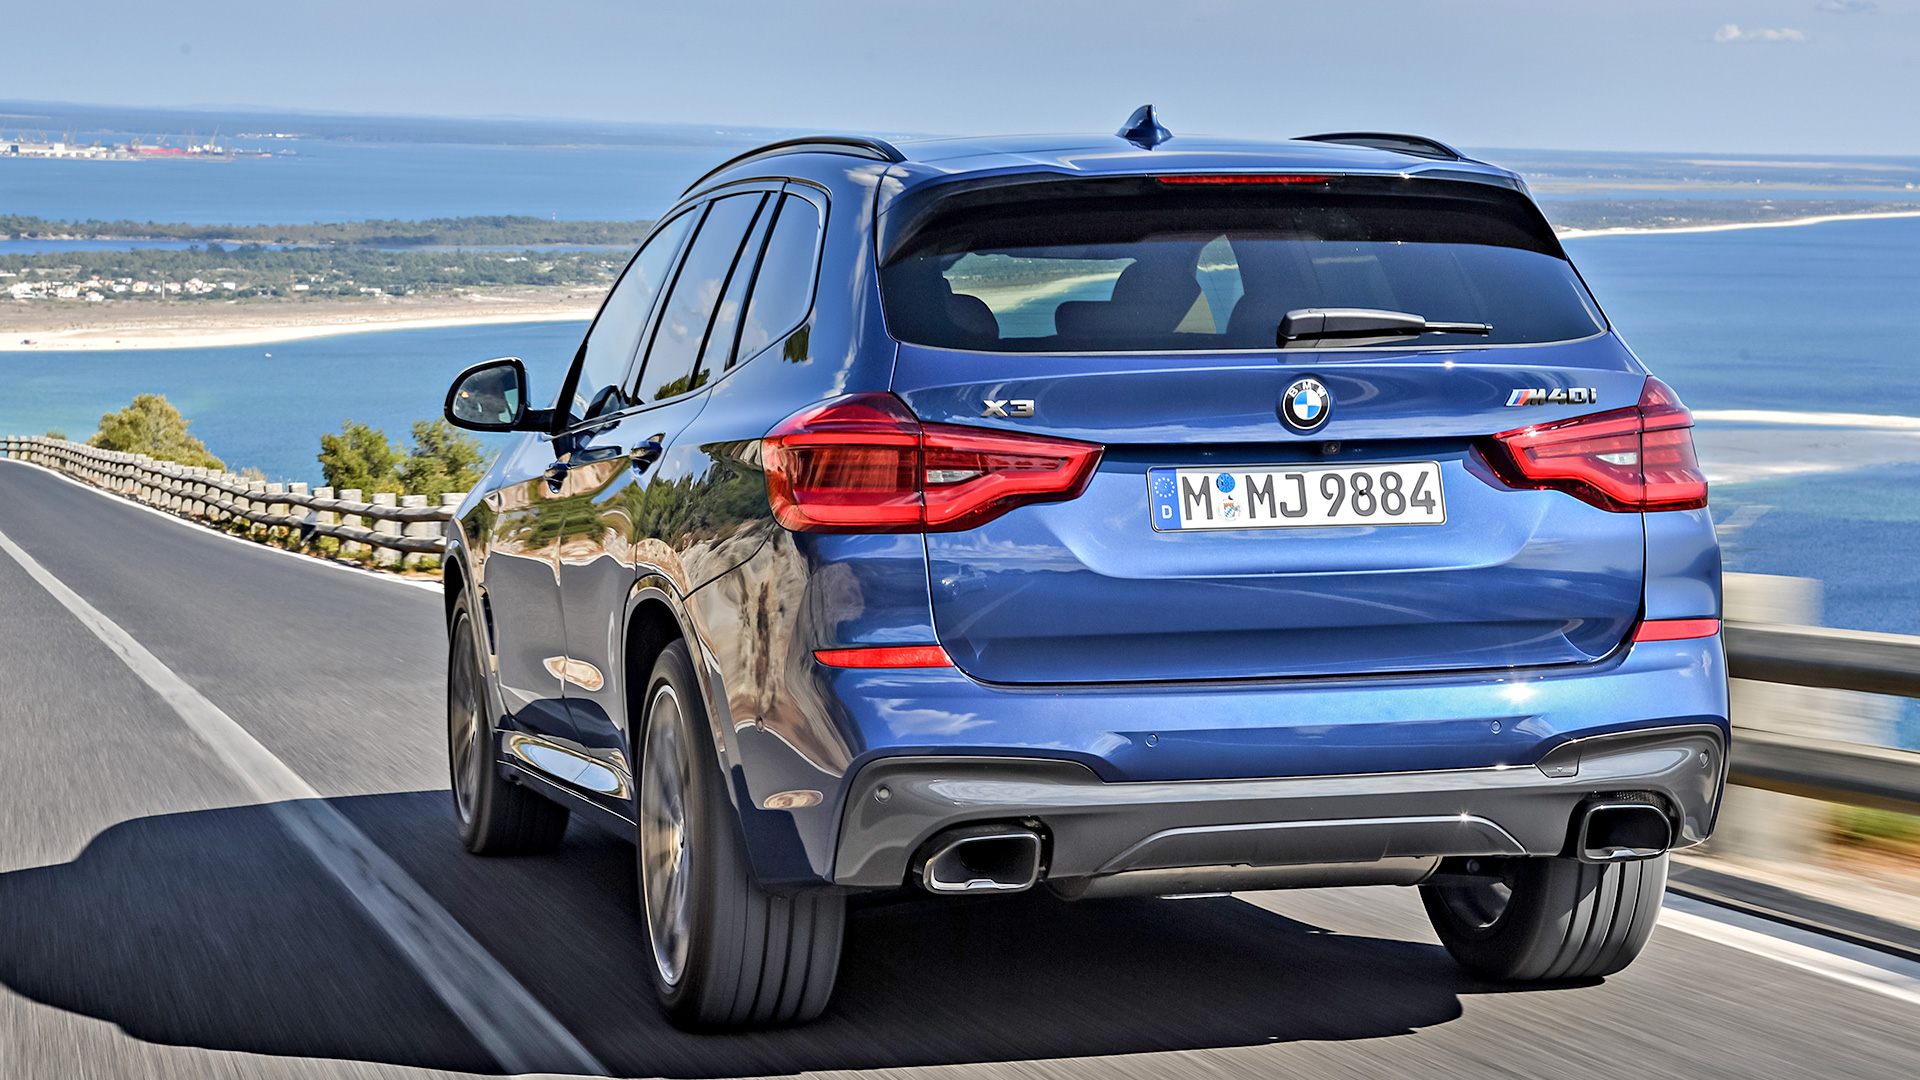 BMW X3 2018 - Price, Mileage, Reviews, Specification, Gallery - Overdrive